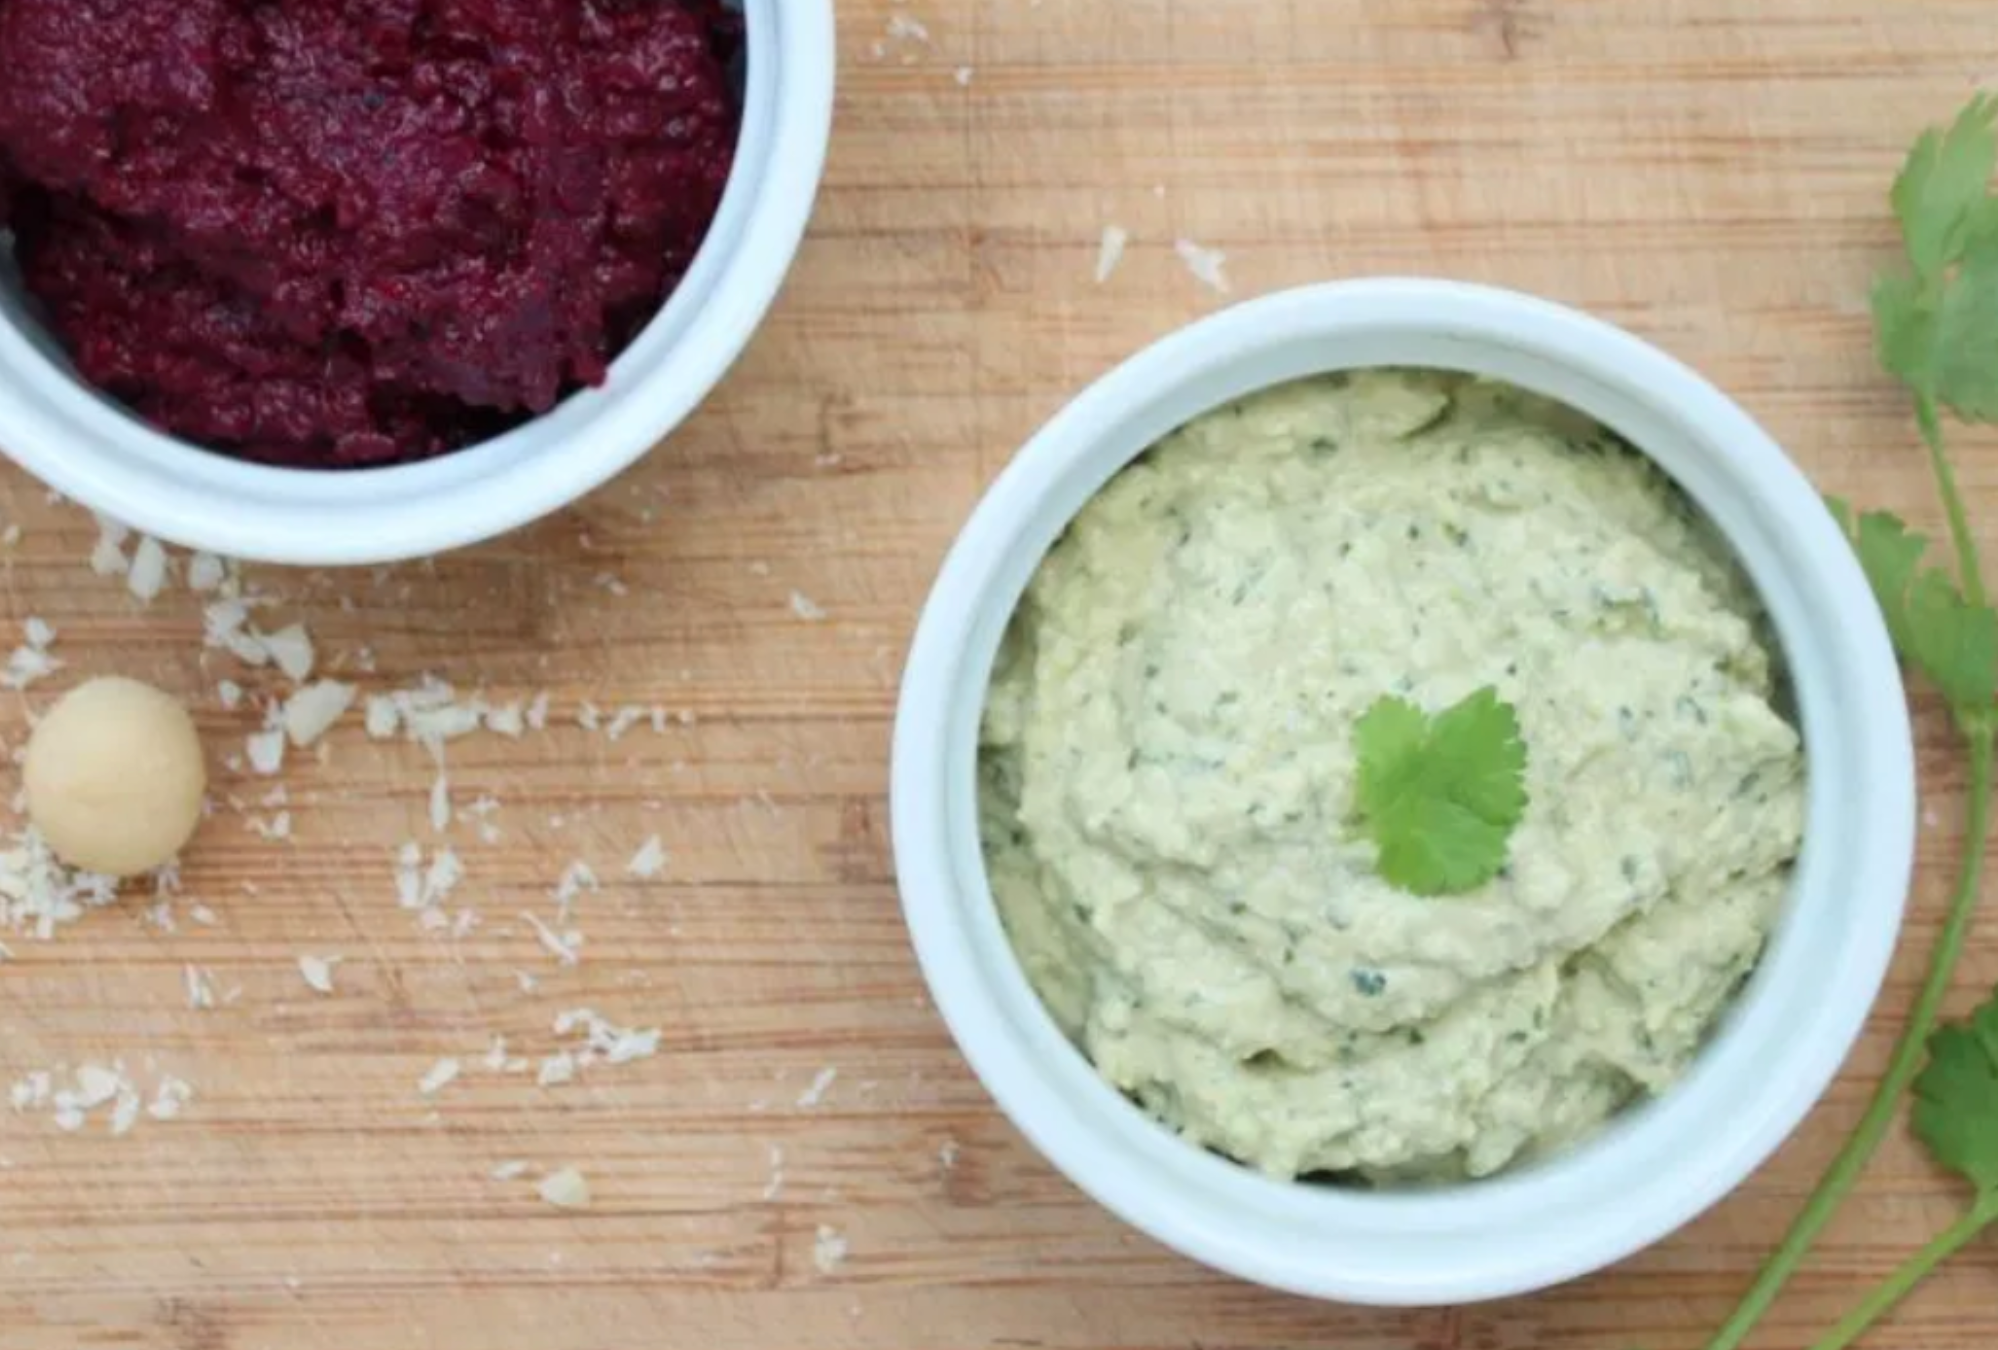 Two Delish Vegan Dips by Meredith East-Powell